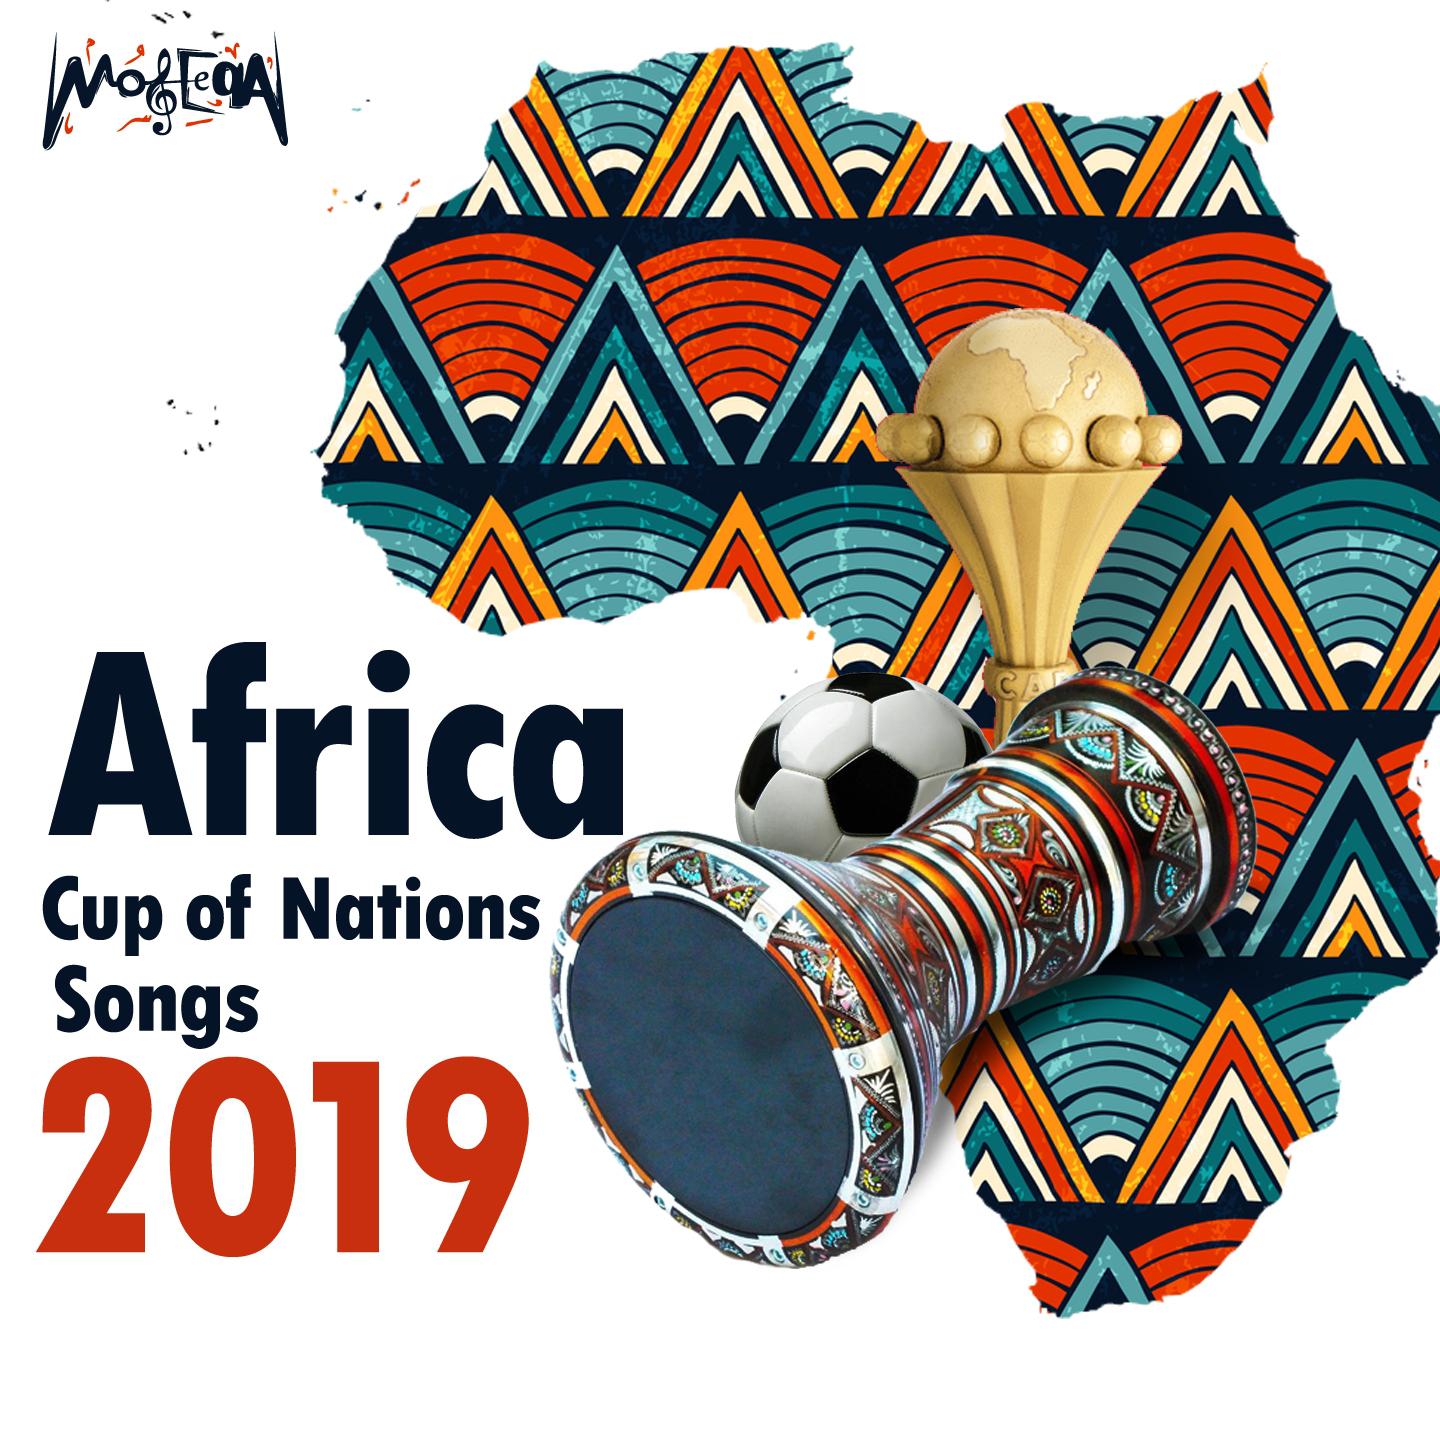 Africa Cup of Nations Songs 2019